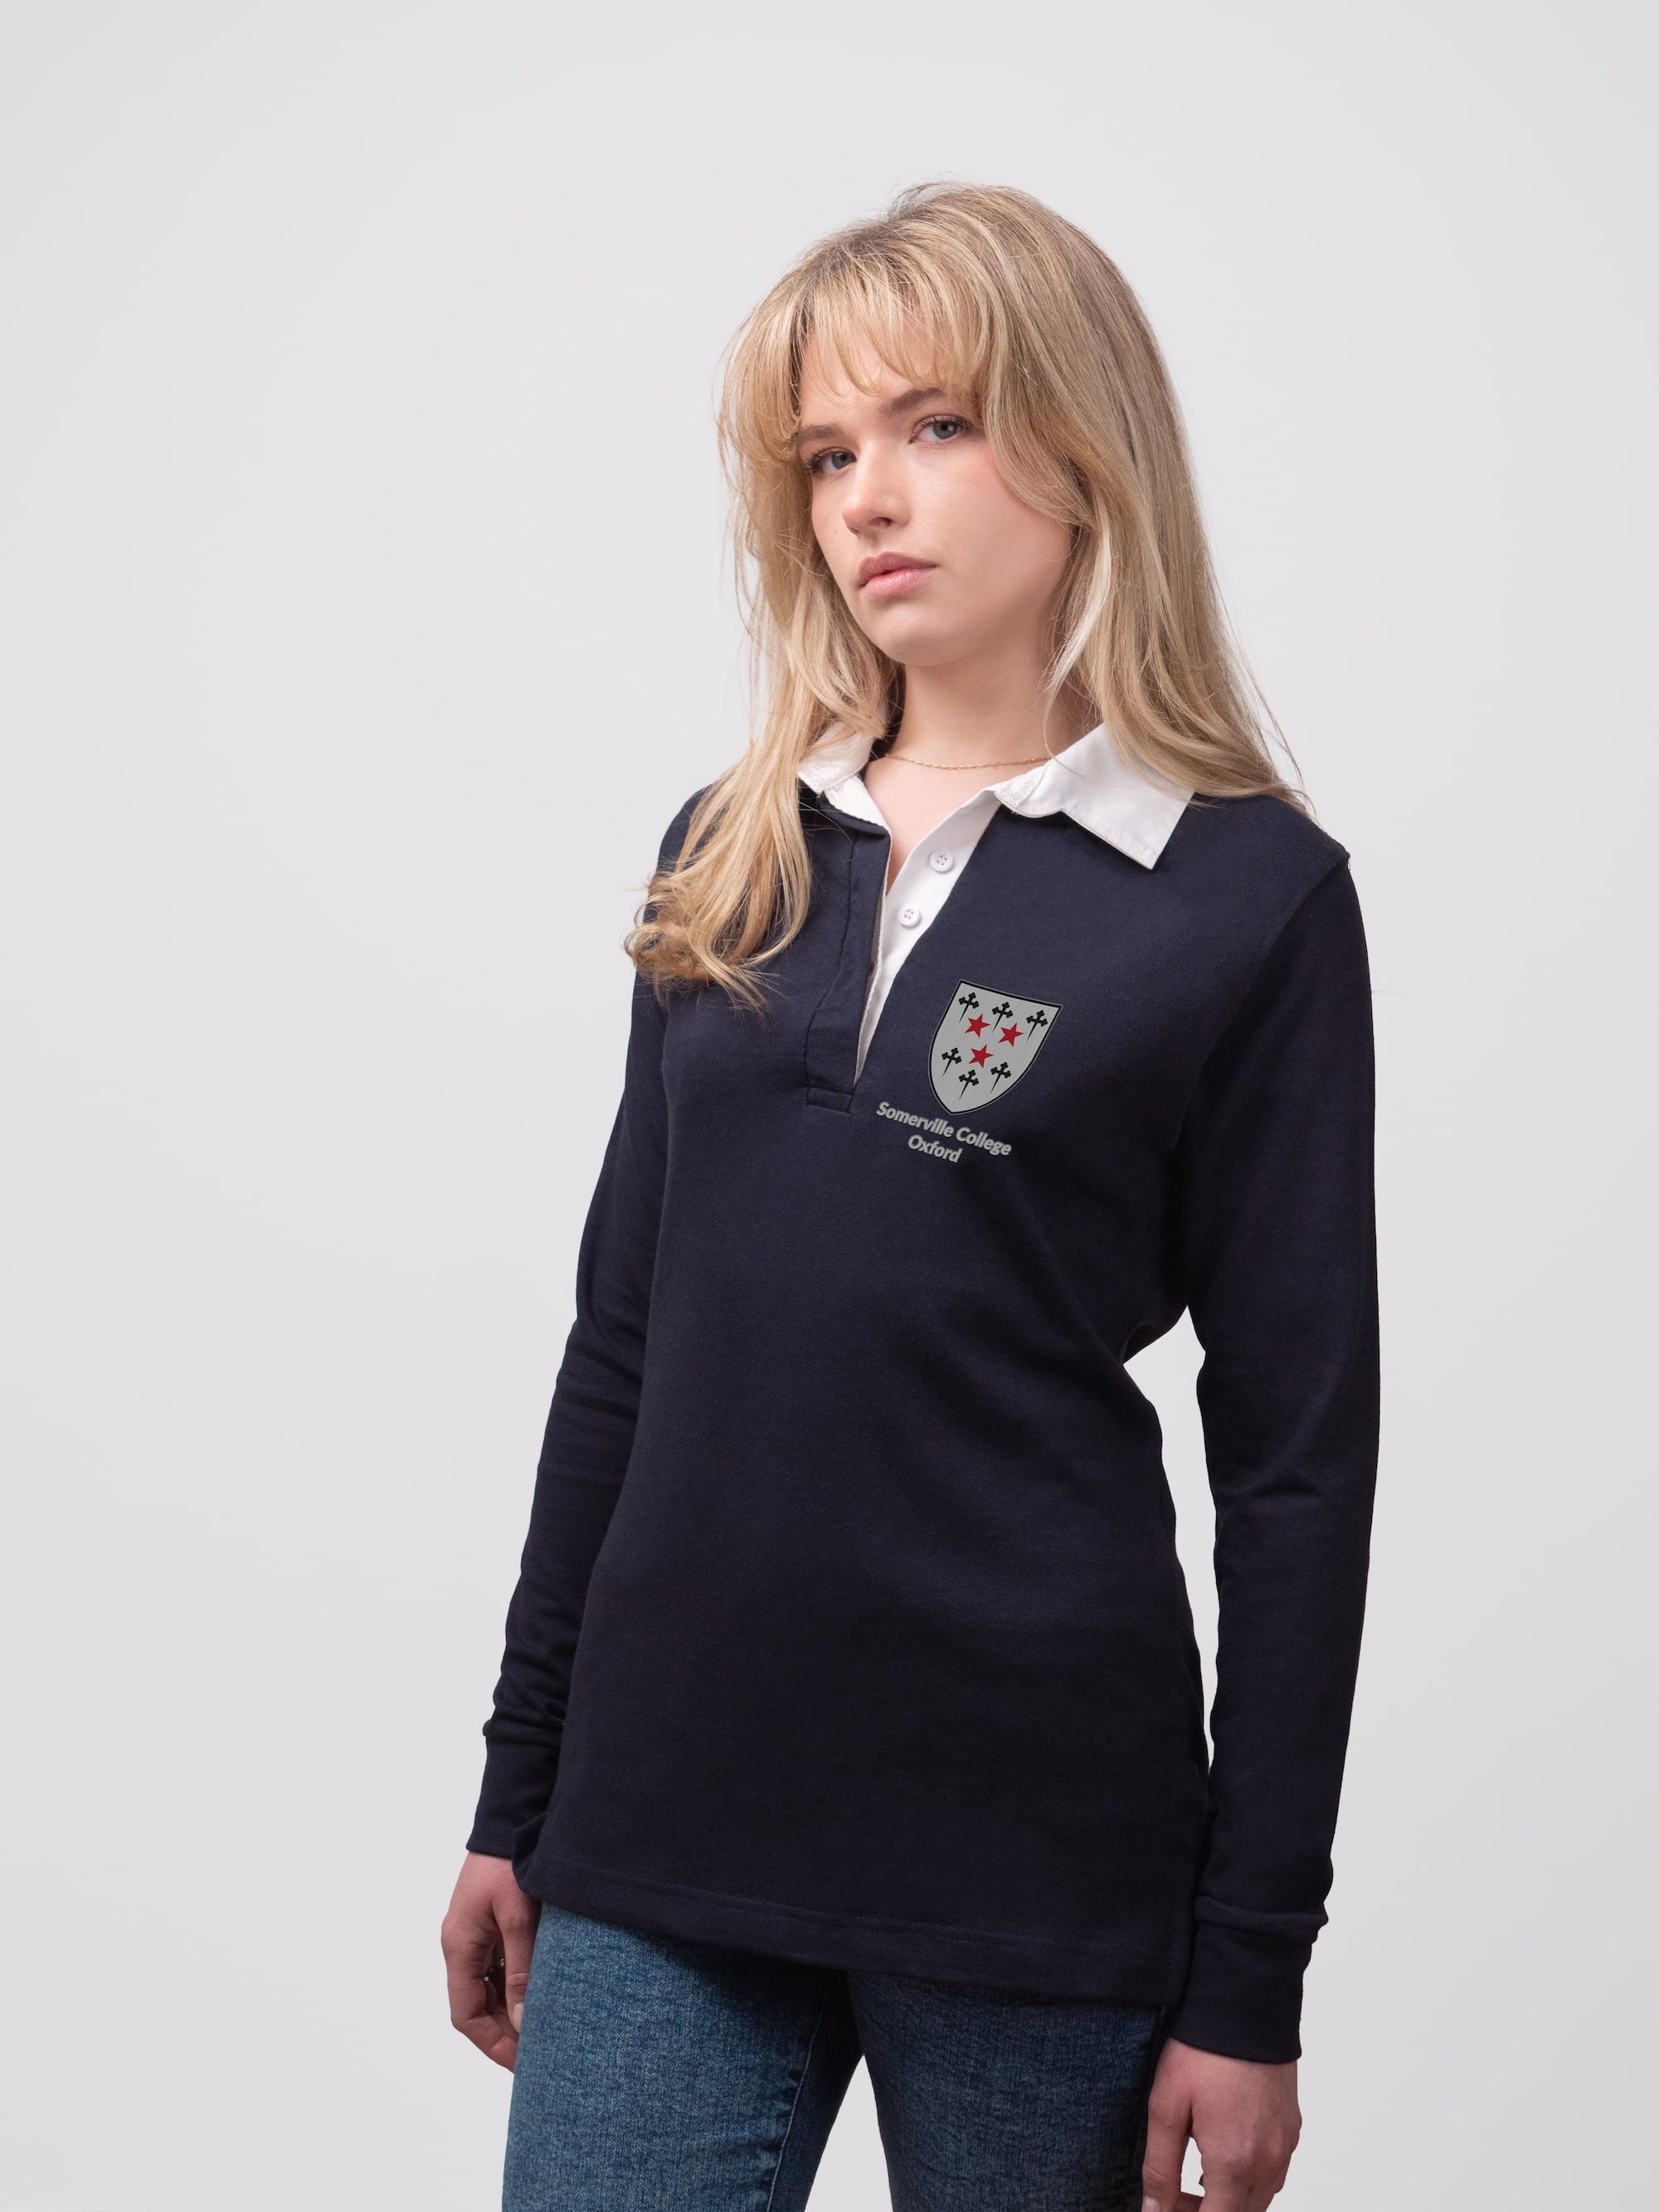 Student wearing a navy Somerville College rugby shirt with embroidered crest